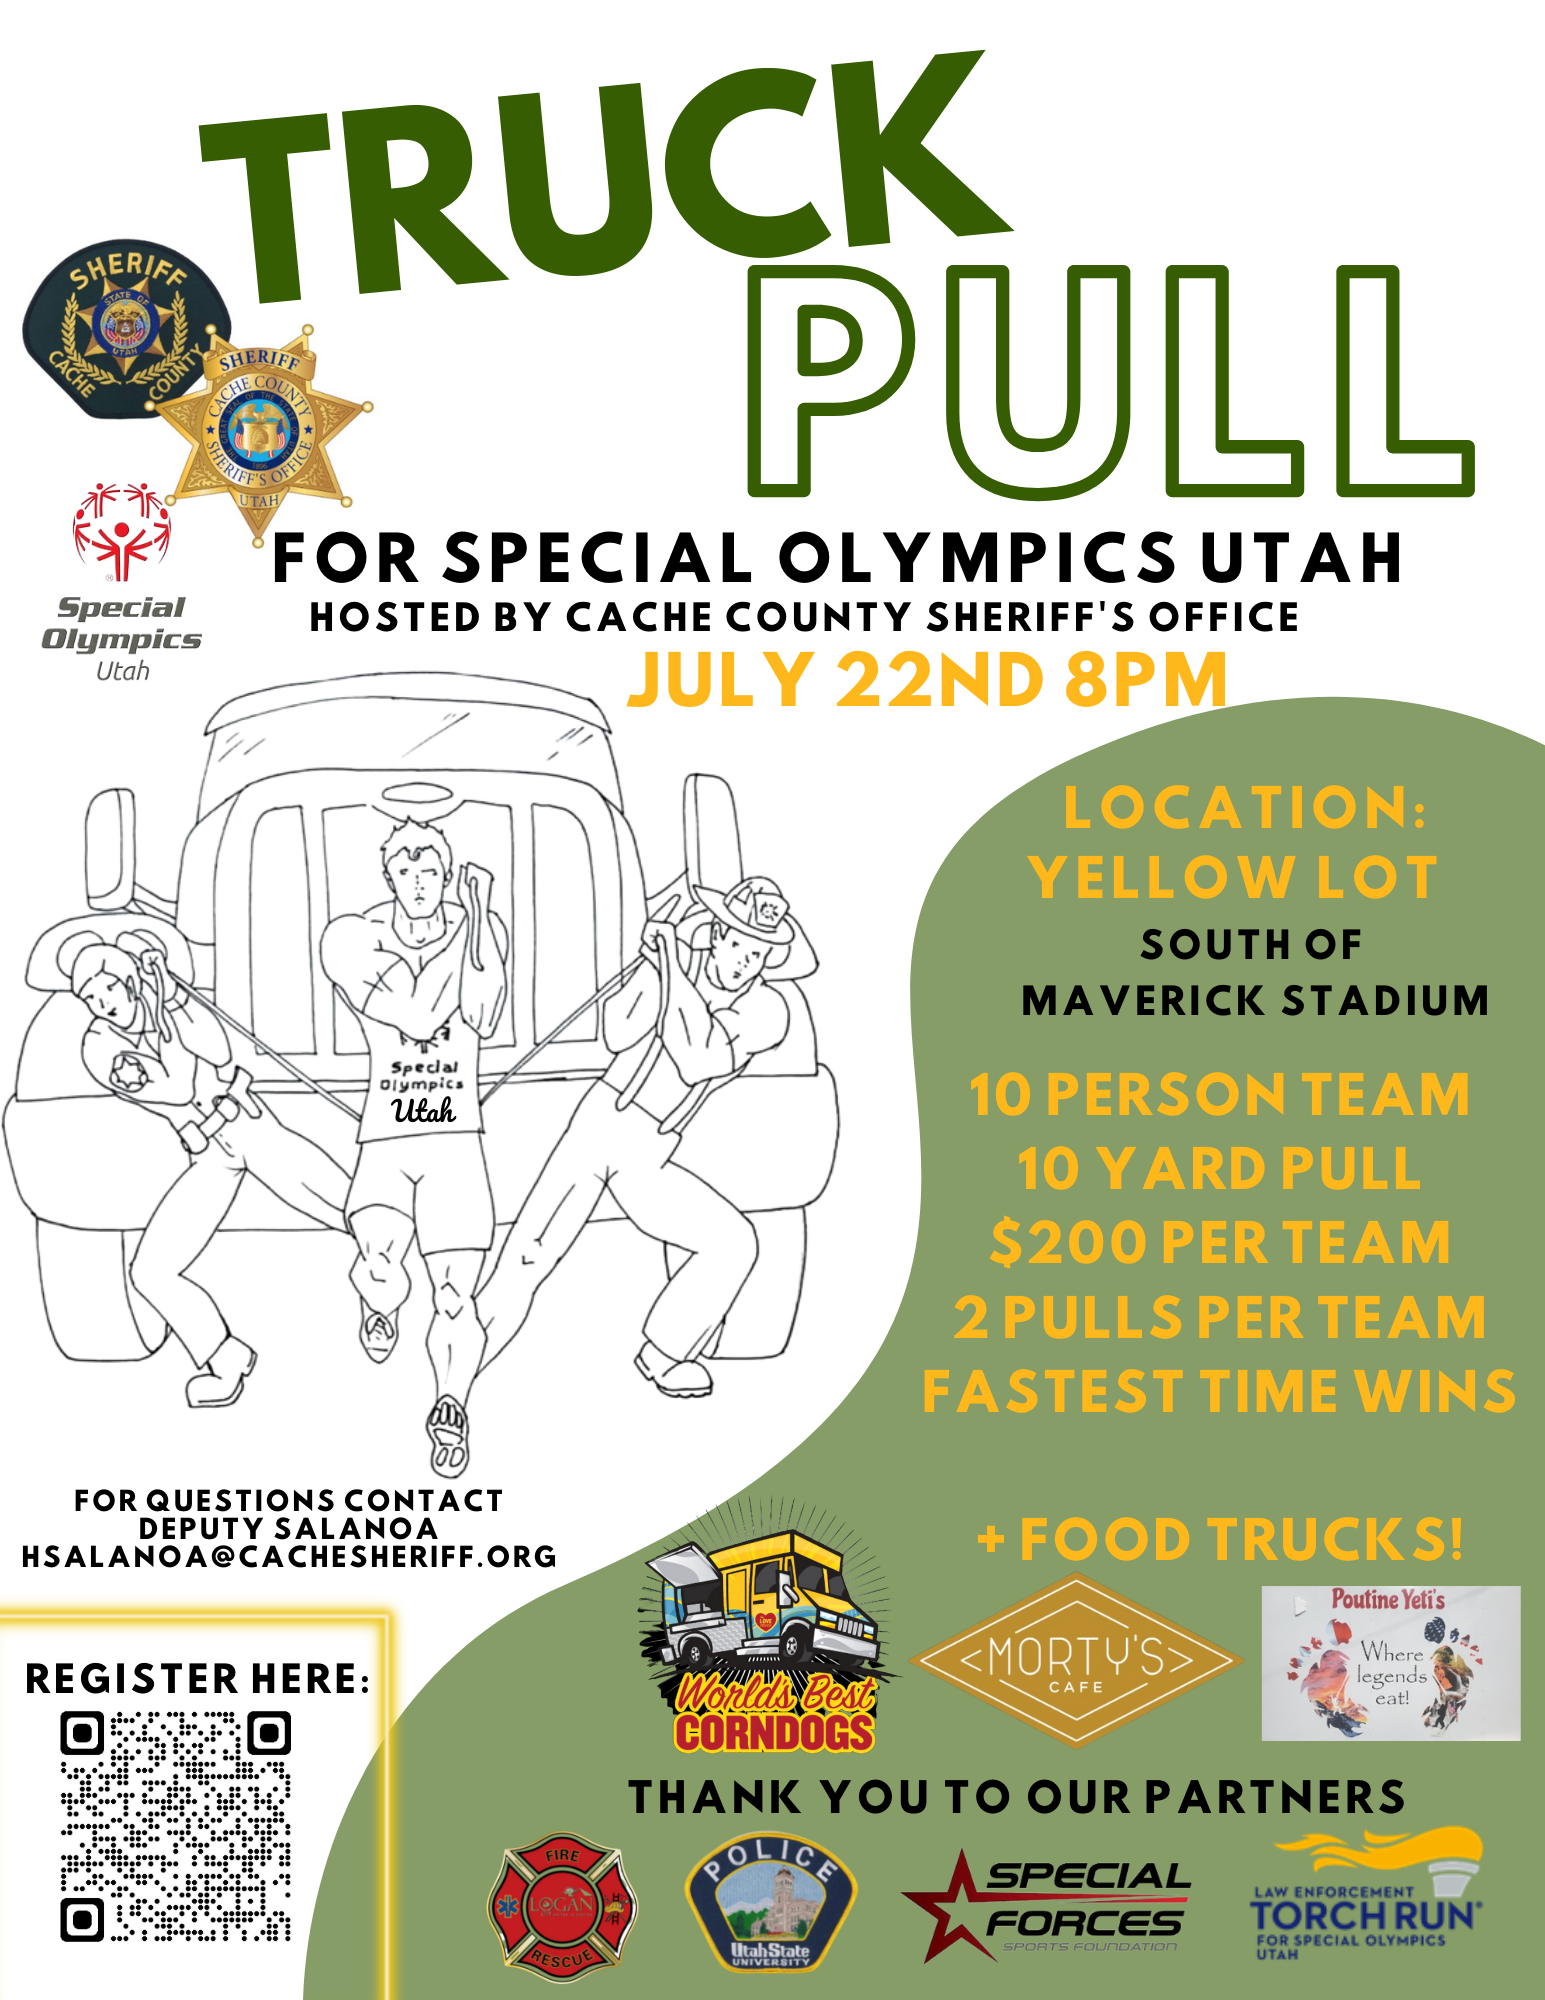 TRUCK PULL FLYER FINAL PNG